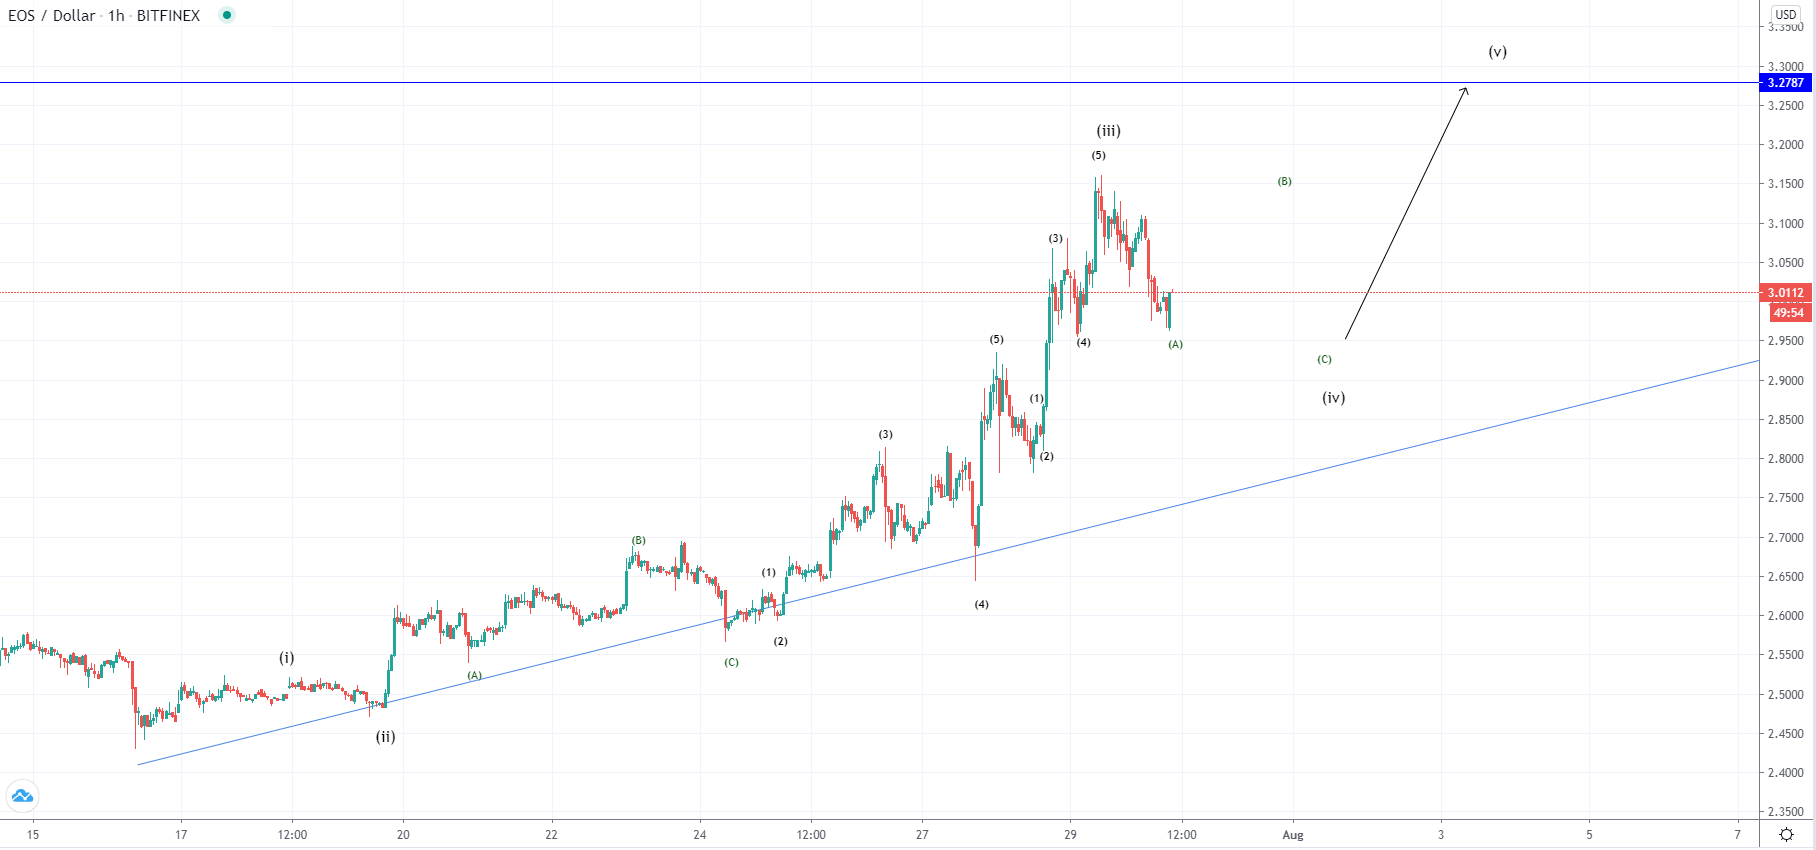 LTC and EOS - Correction developing but more upside to come